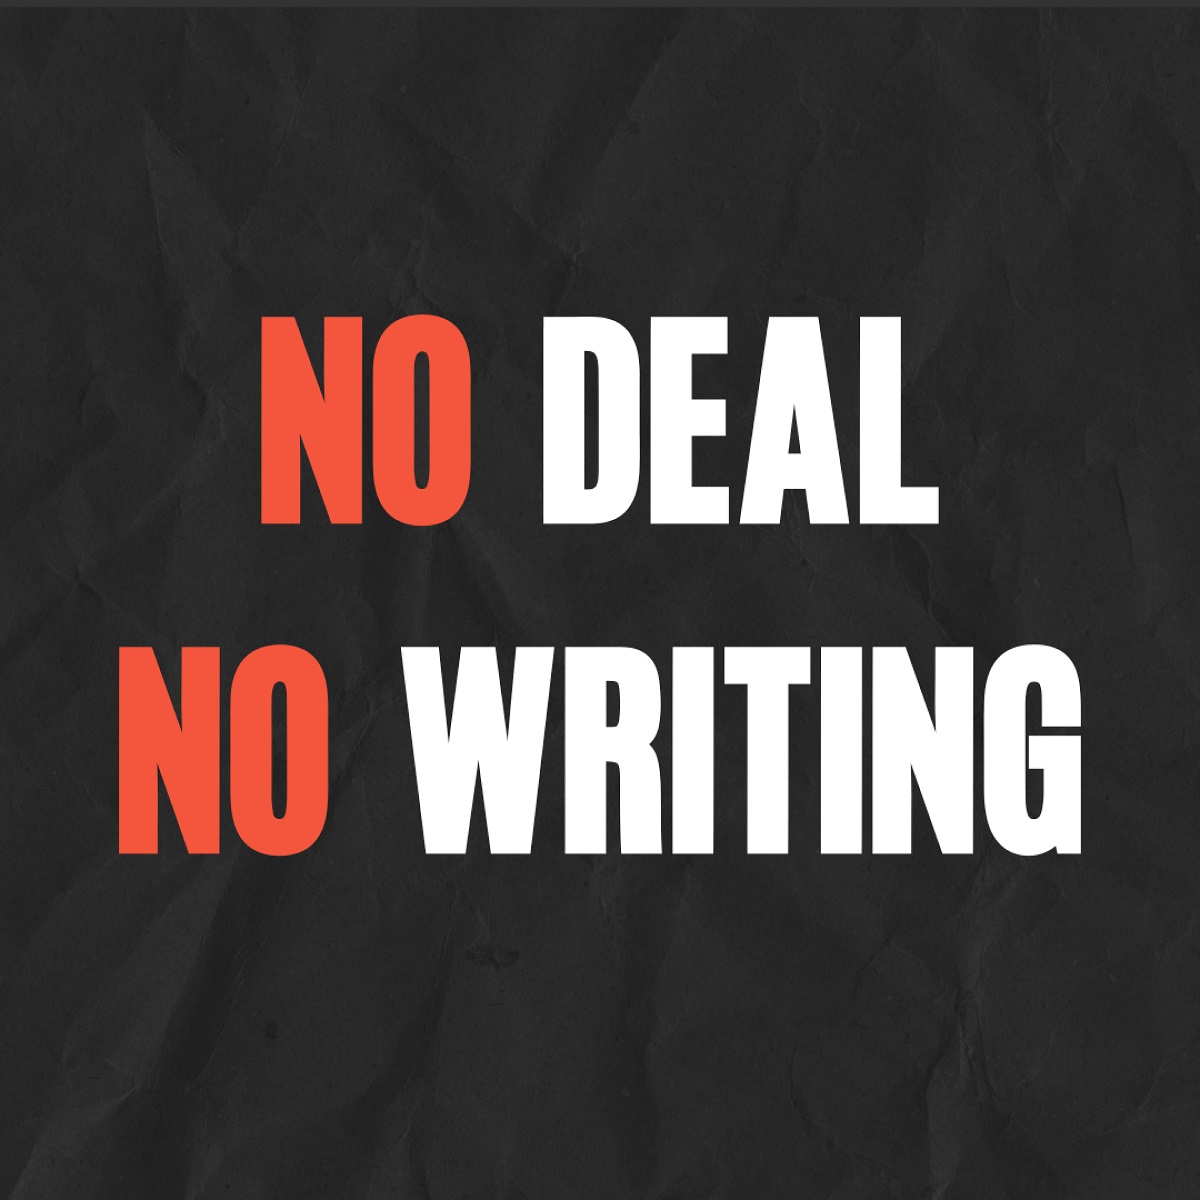 Square graphic that reads "NO DEAL NO WRITING" Both "Nos" are in red, and the rest of the letters are white. The words are on a black background that looks like crumpled paper.